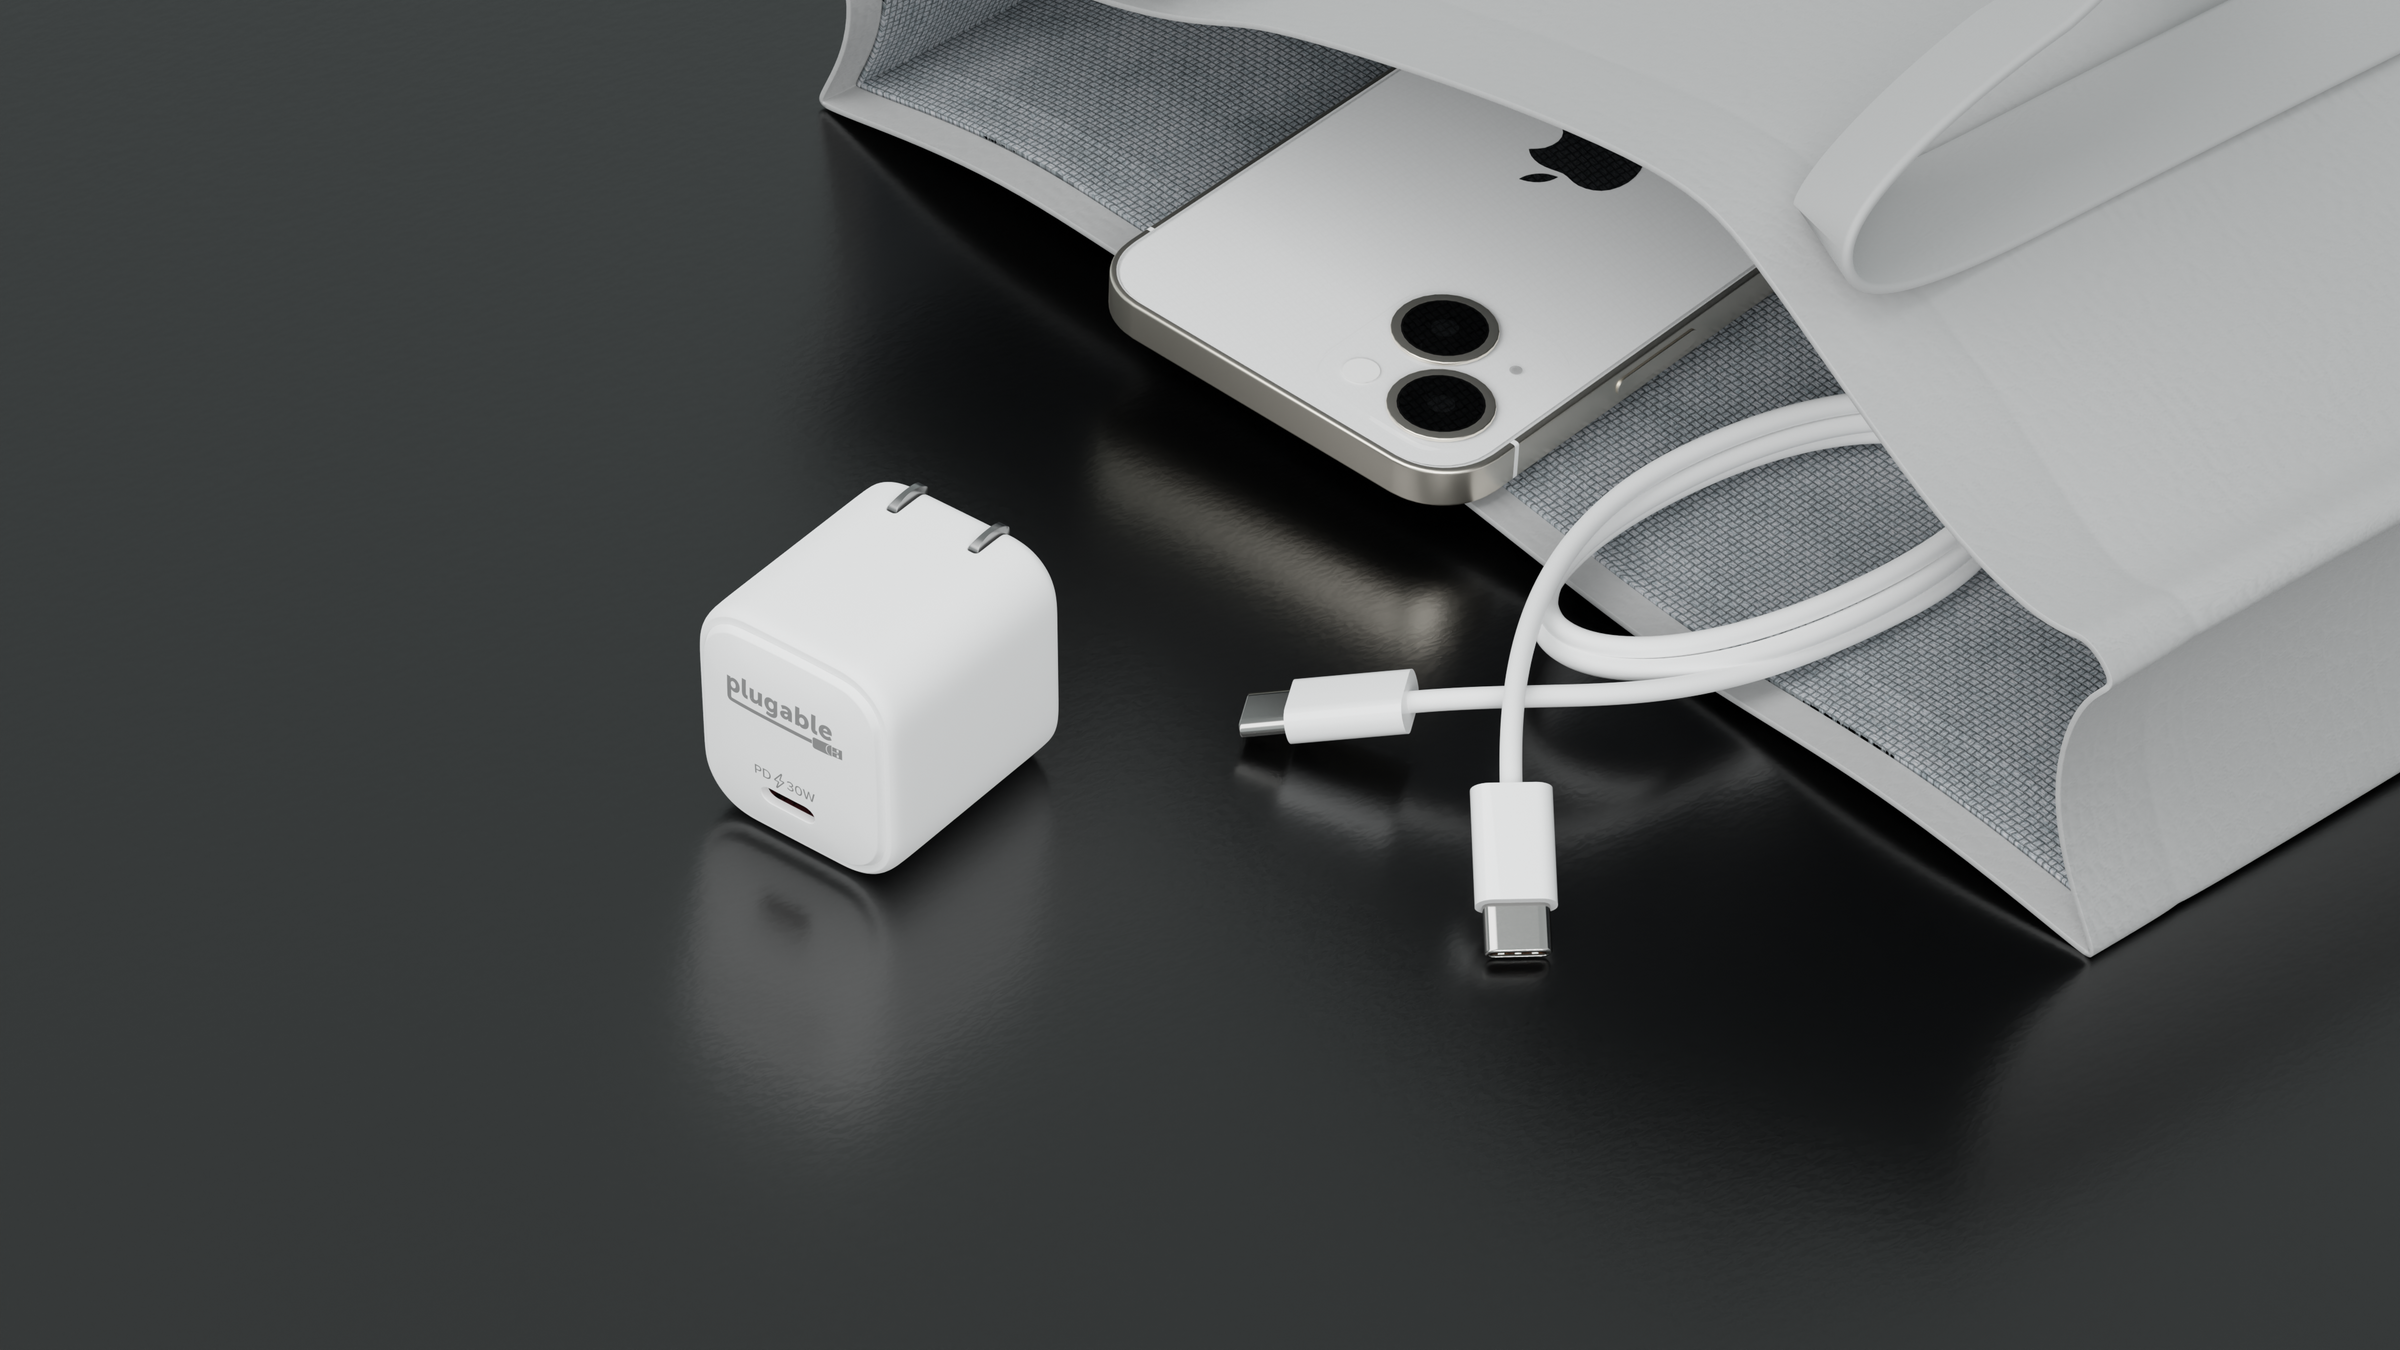 Charge your iPhone 15 with Plugable 